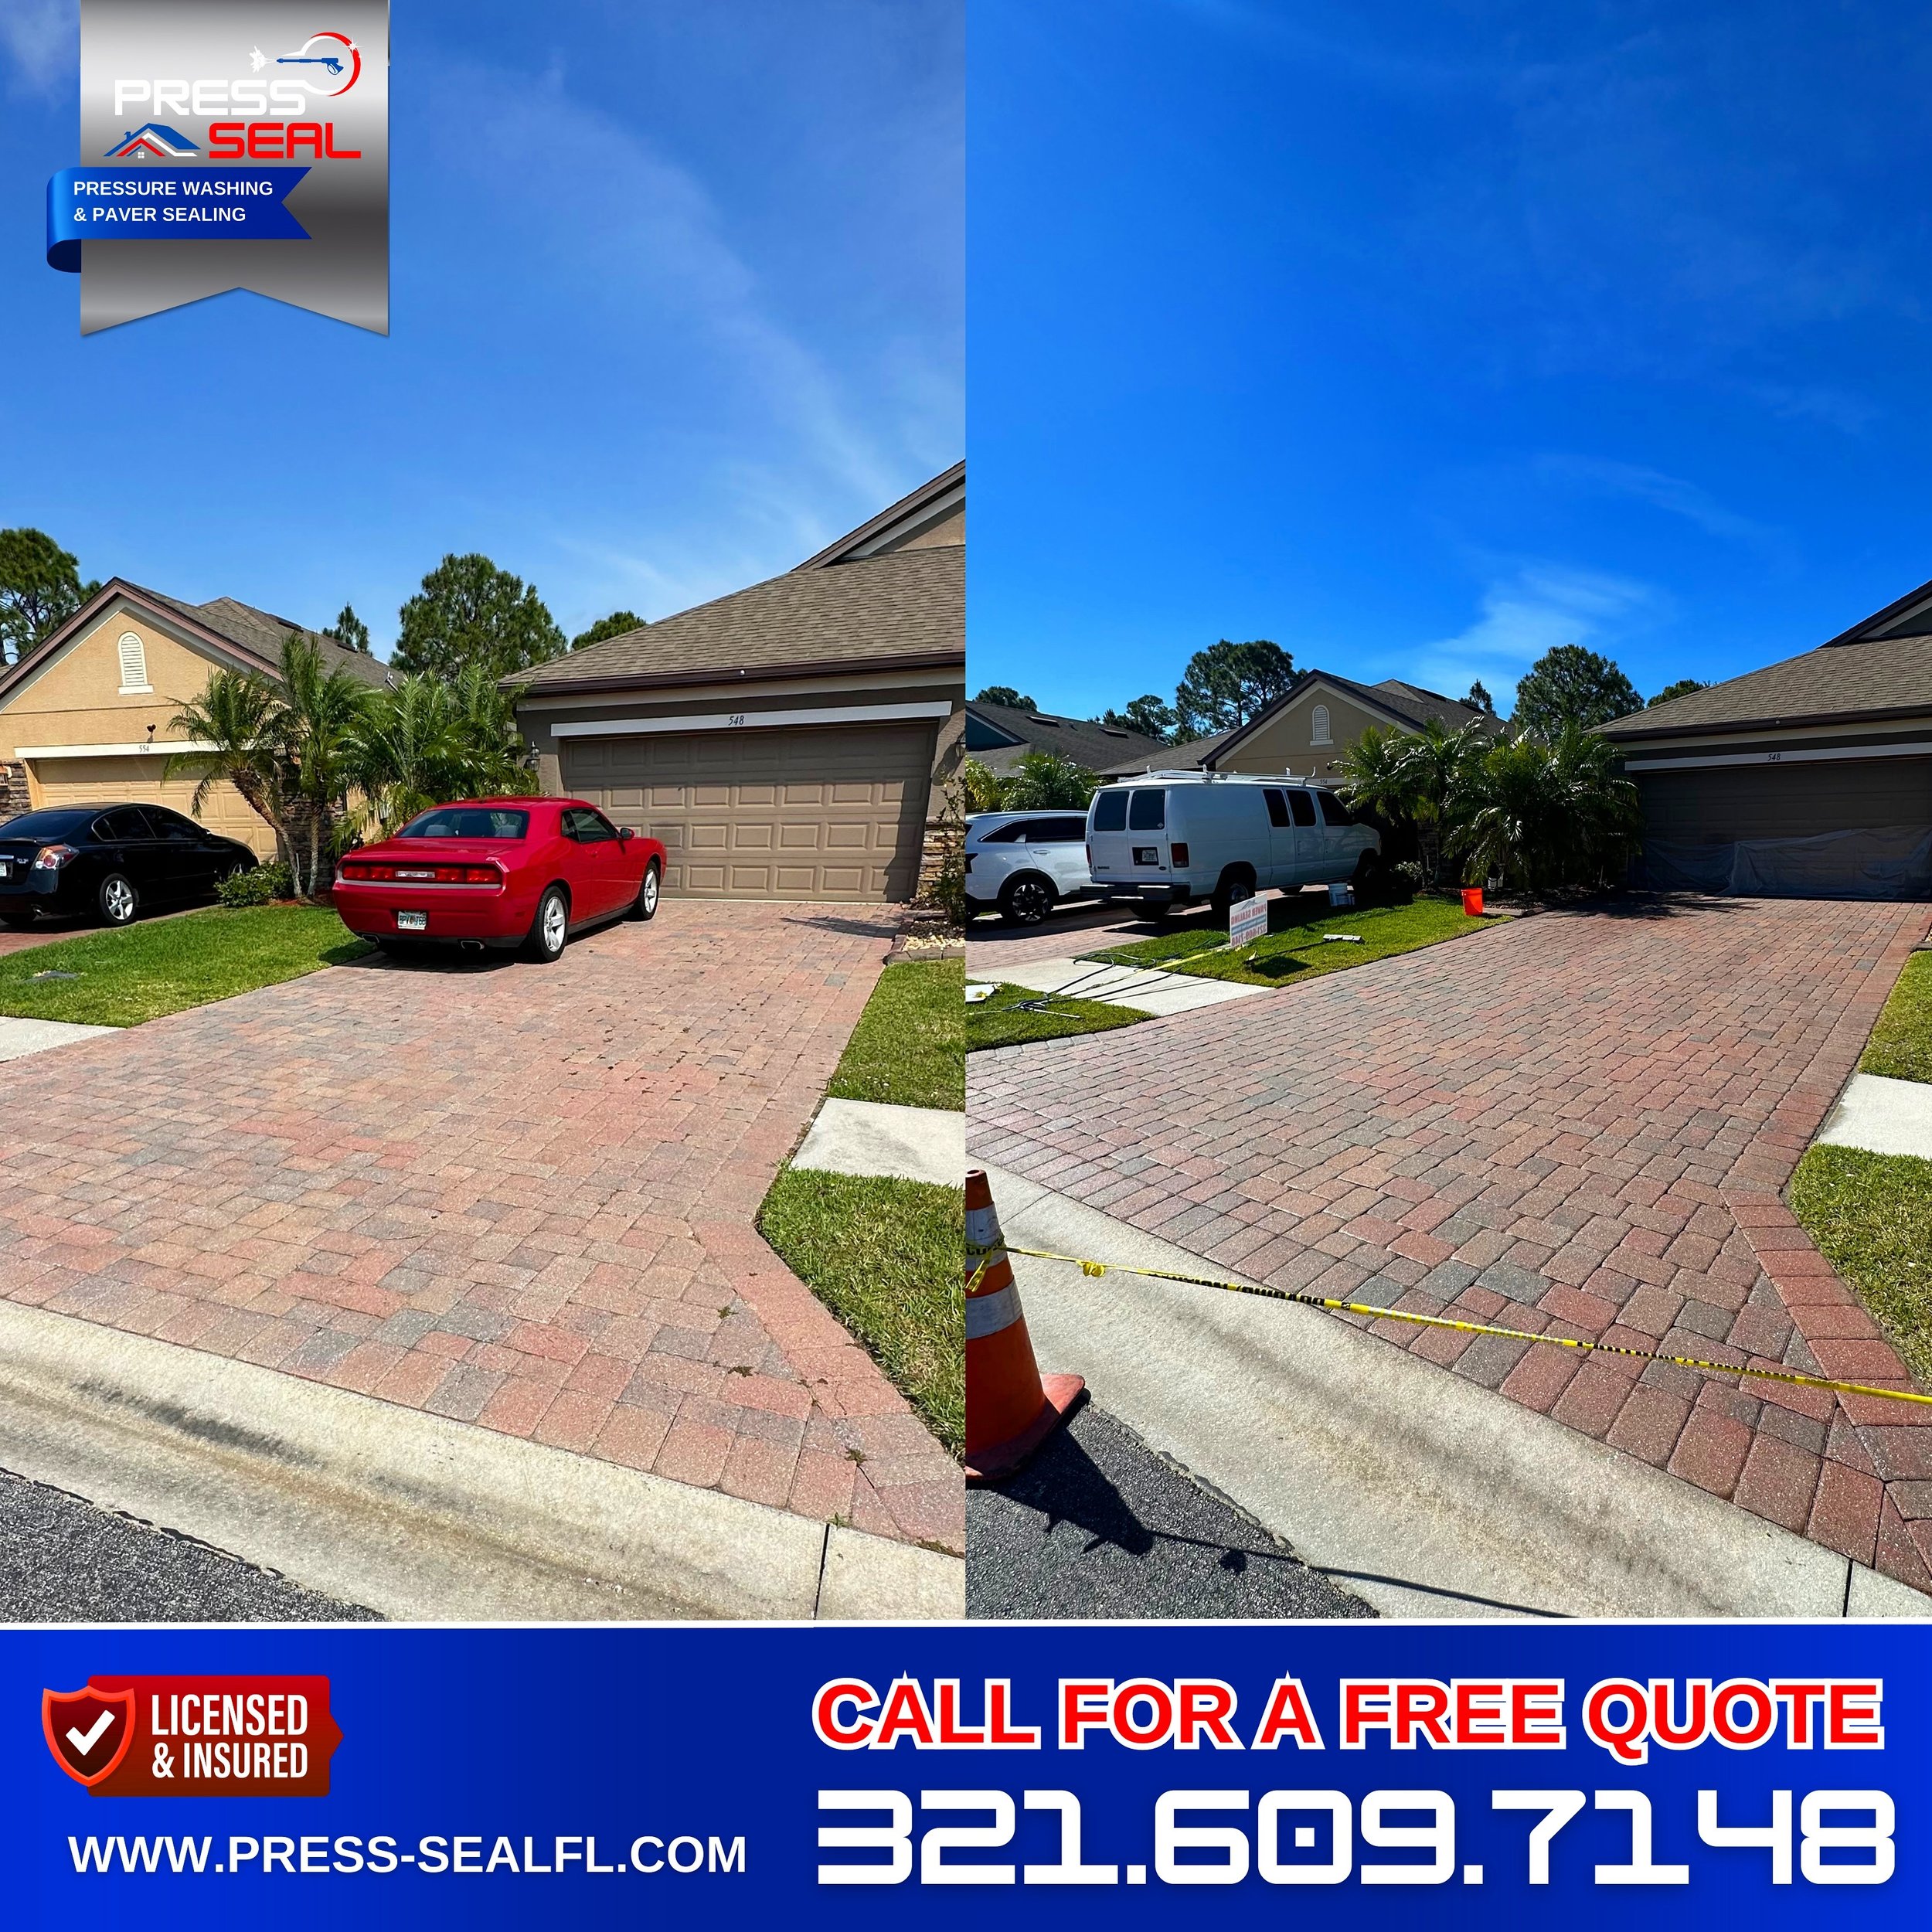 From dull to dazzling! These pavers are extremely sun beaten with heavy aggregate showing through. Witness the stunning transformation of these vibrant red pavers after sealing. 🔴✨

🌟 CONTACT US 🌟
🤳🏼 321.609.7148
📧 contact@press-sealfl.com
💻 P